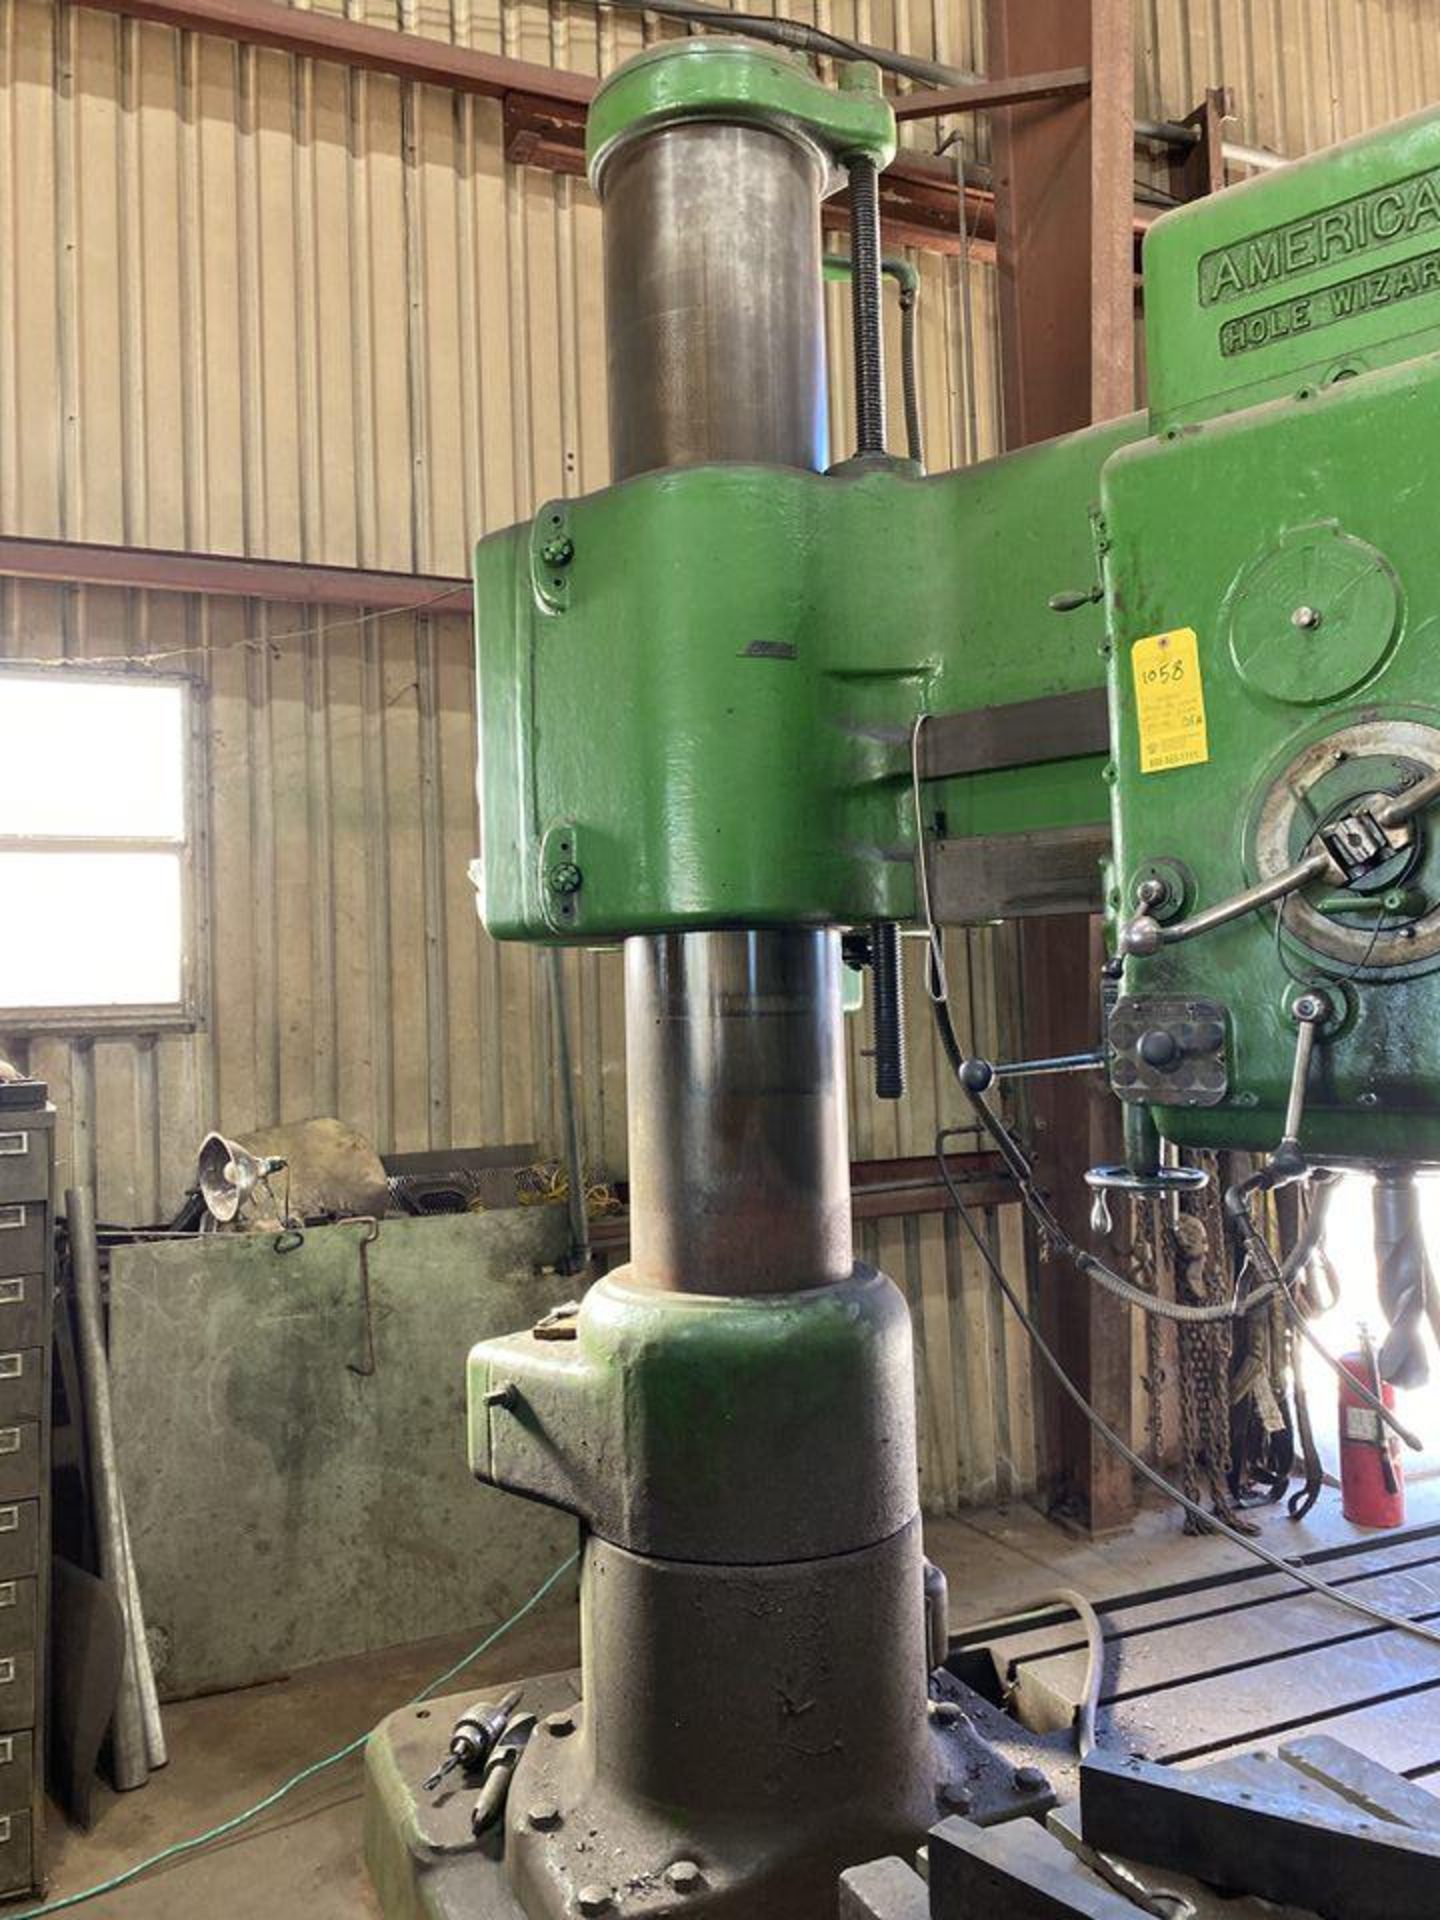 6' 15" American Hole Wizard Radial Arm Drill - Image 4 of 7